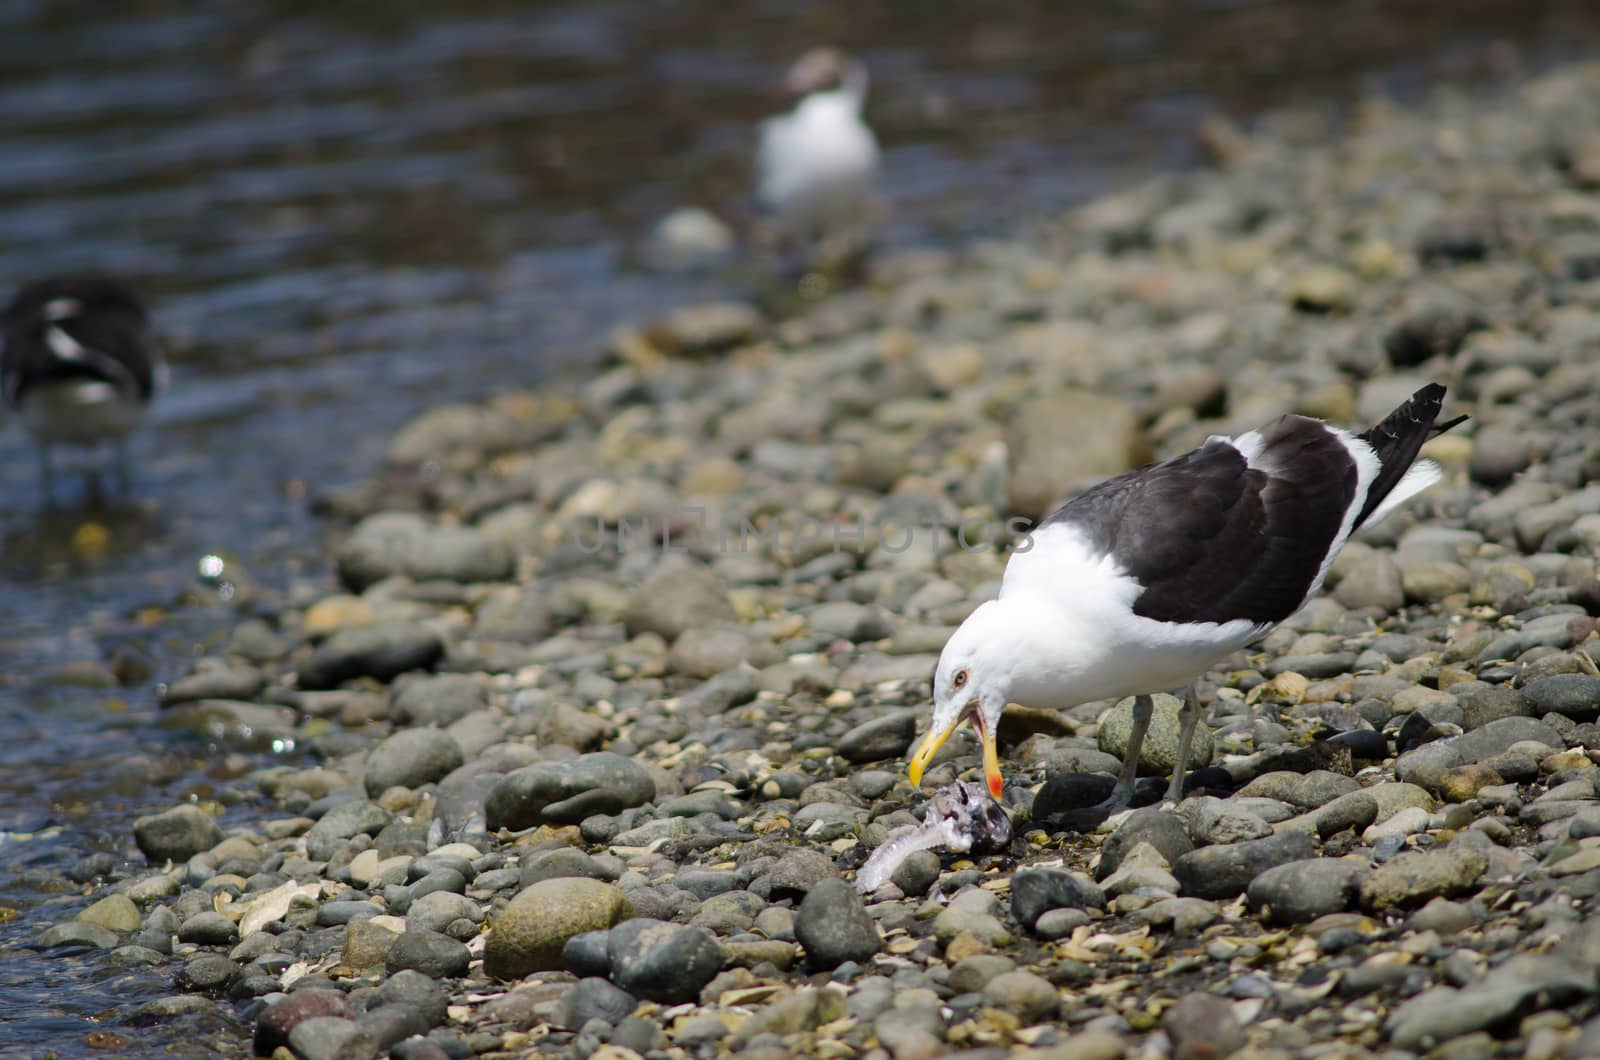 Kelp gull eating the remains of a fish. by VictorSuarez